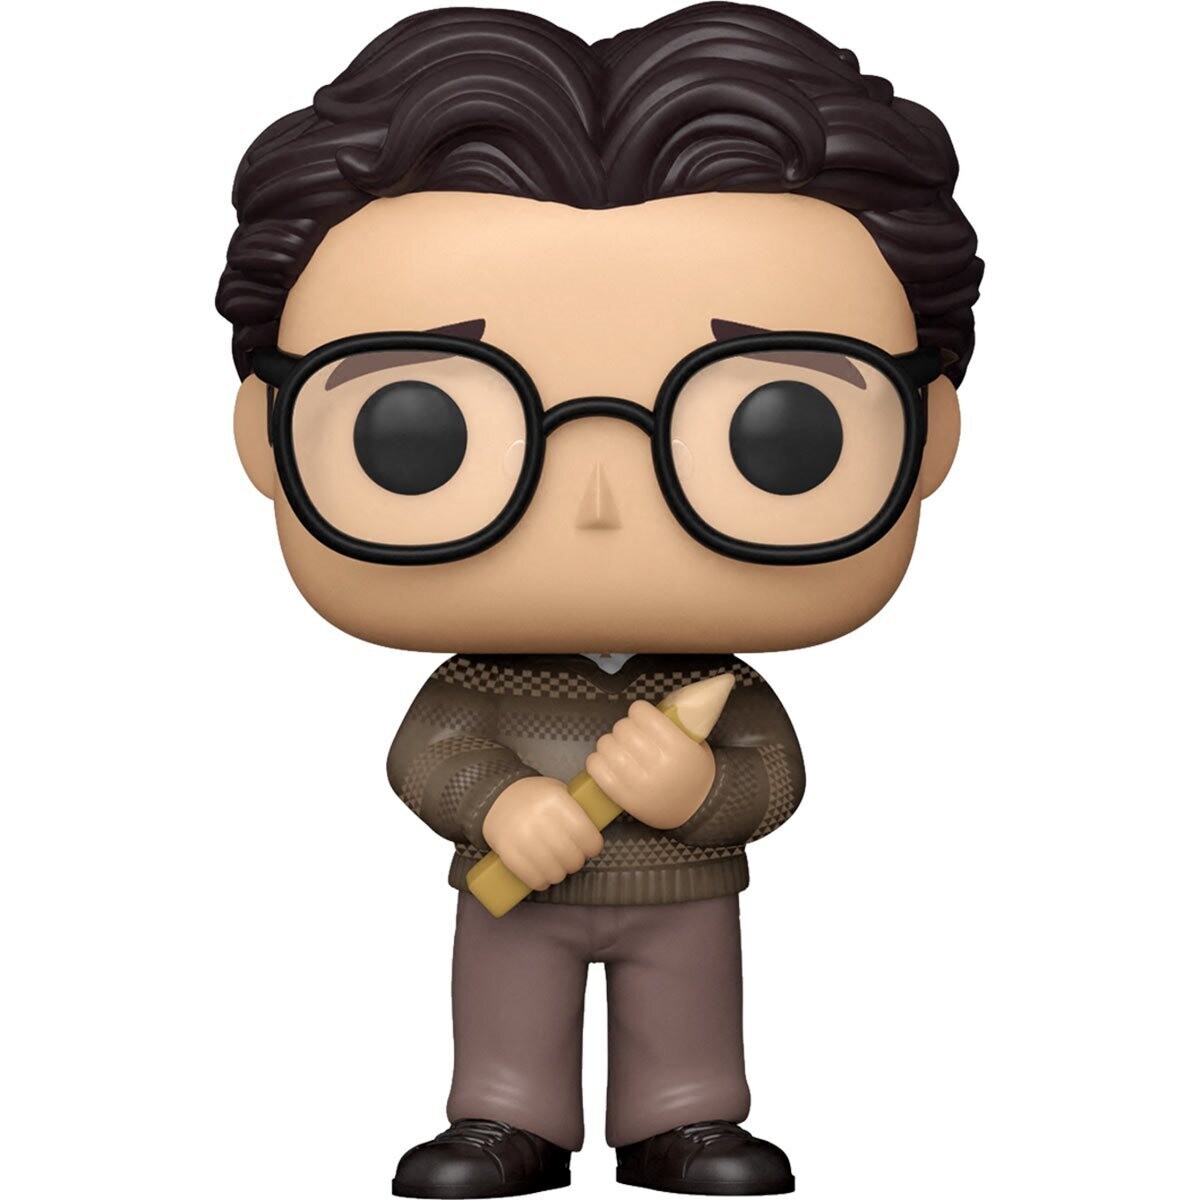 PRE-ORDER Funko What We Do in the Shadows Guillermo Pop! VInyl Figure